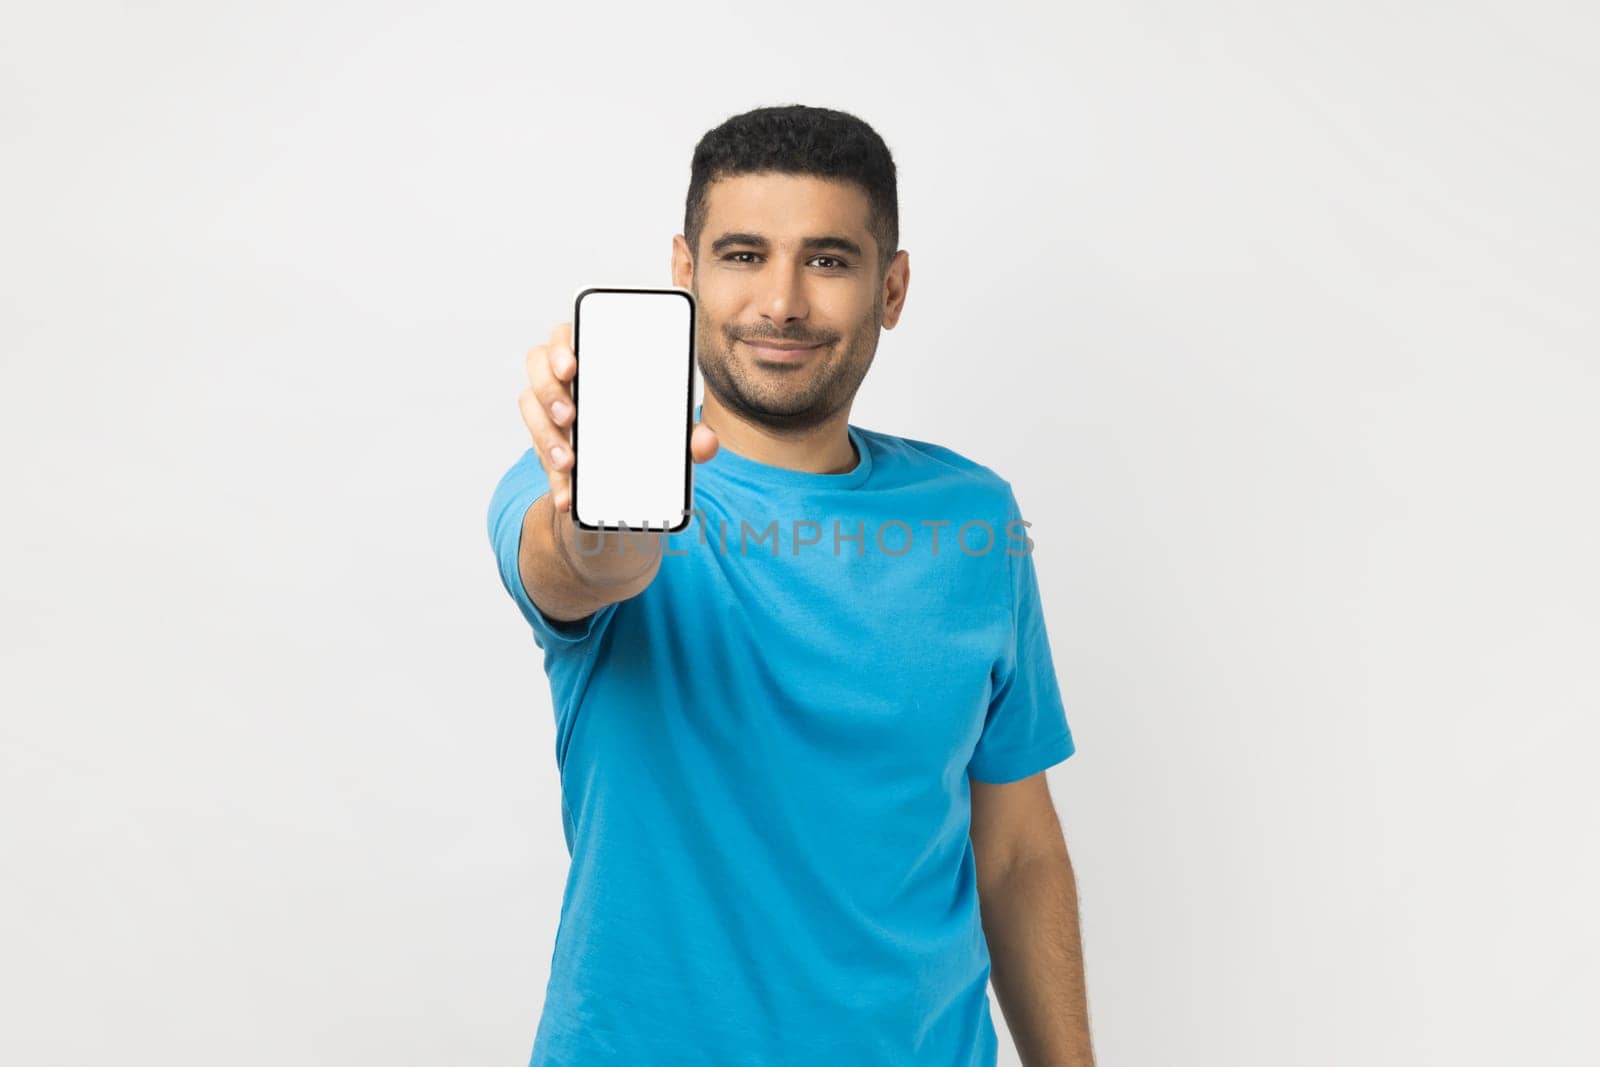 Portrait of cheerful satisfied unshaven man wearing blue T- shirt standing holding out smart phone with empty screen, copy space for advertisement. Indoor studio shot isolated on gray background.